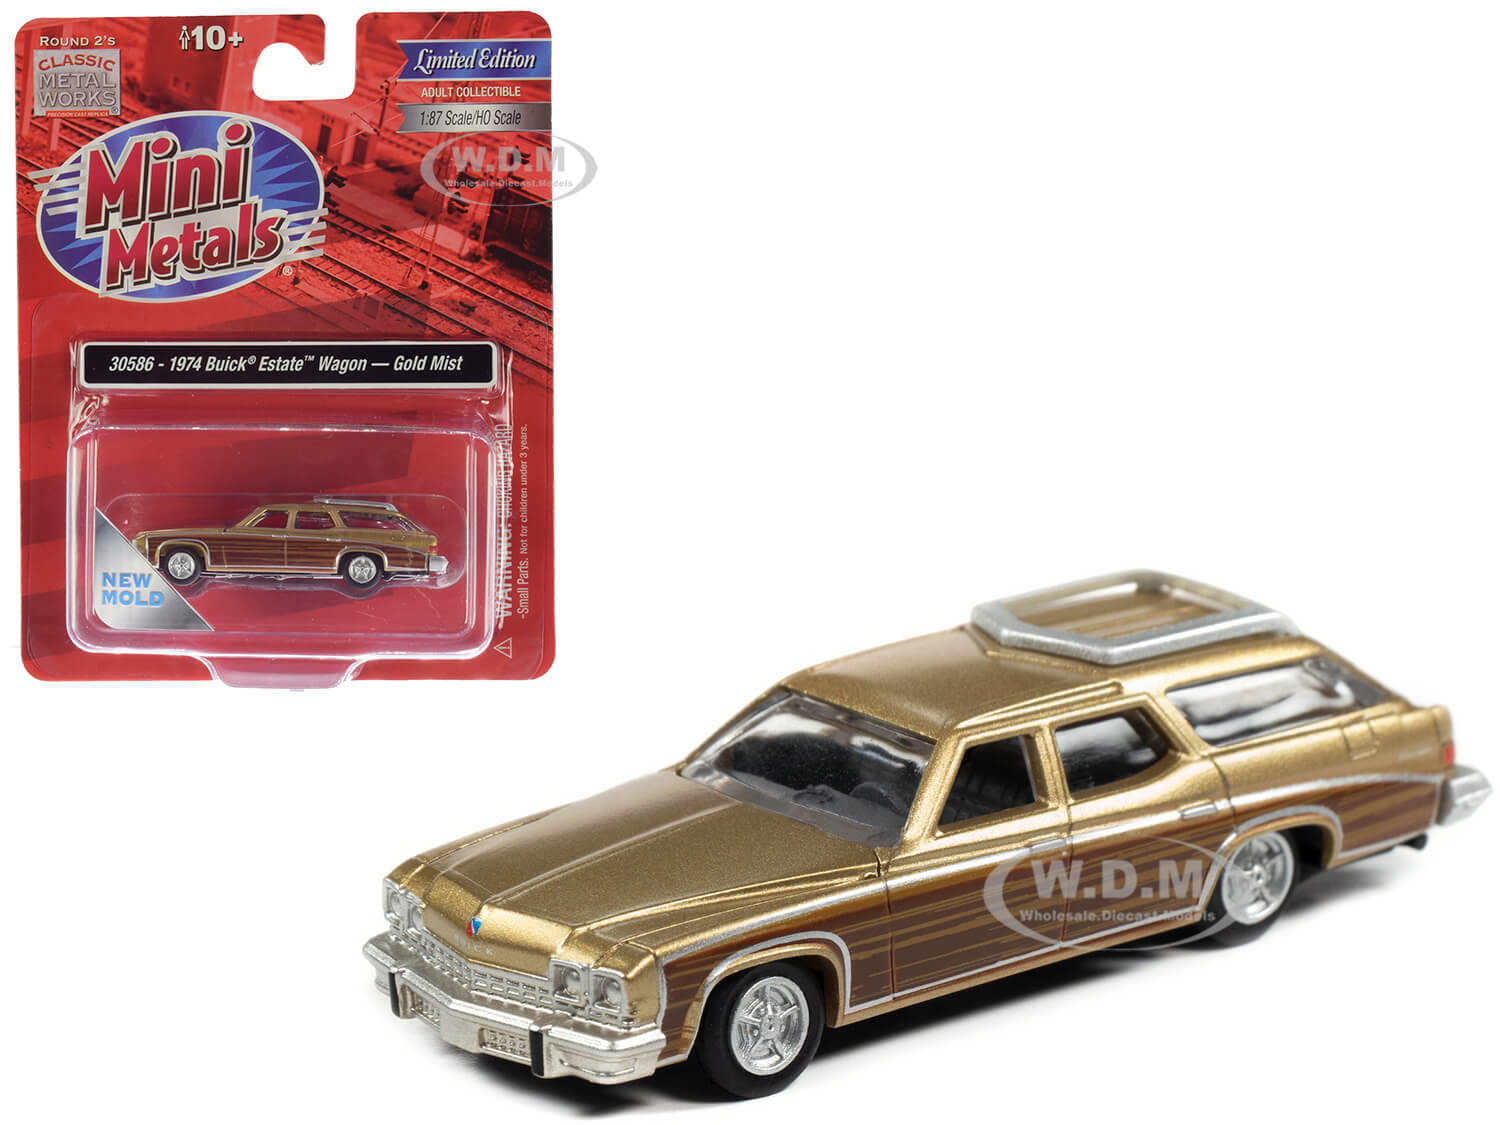 1974 Buick Estate Wagon Gold Mist Metallic With Woodgrain Sides 1/87 (ho) Scale Model Car By Classic Metal Works